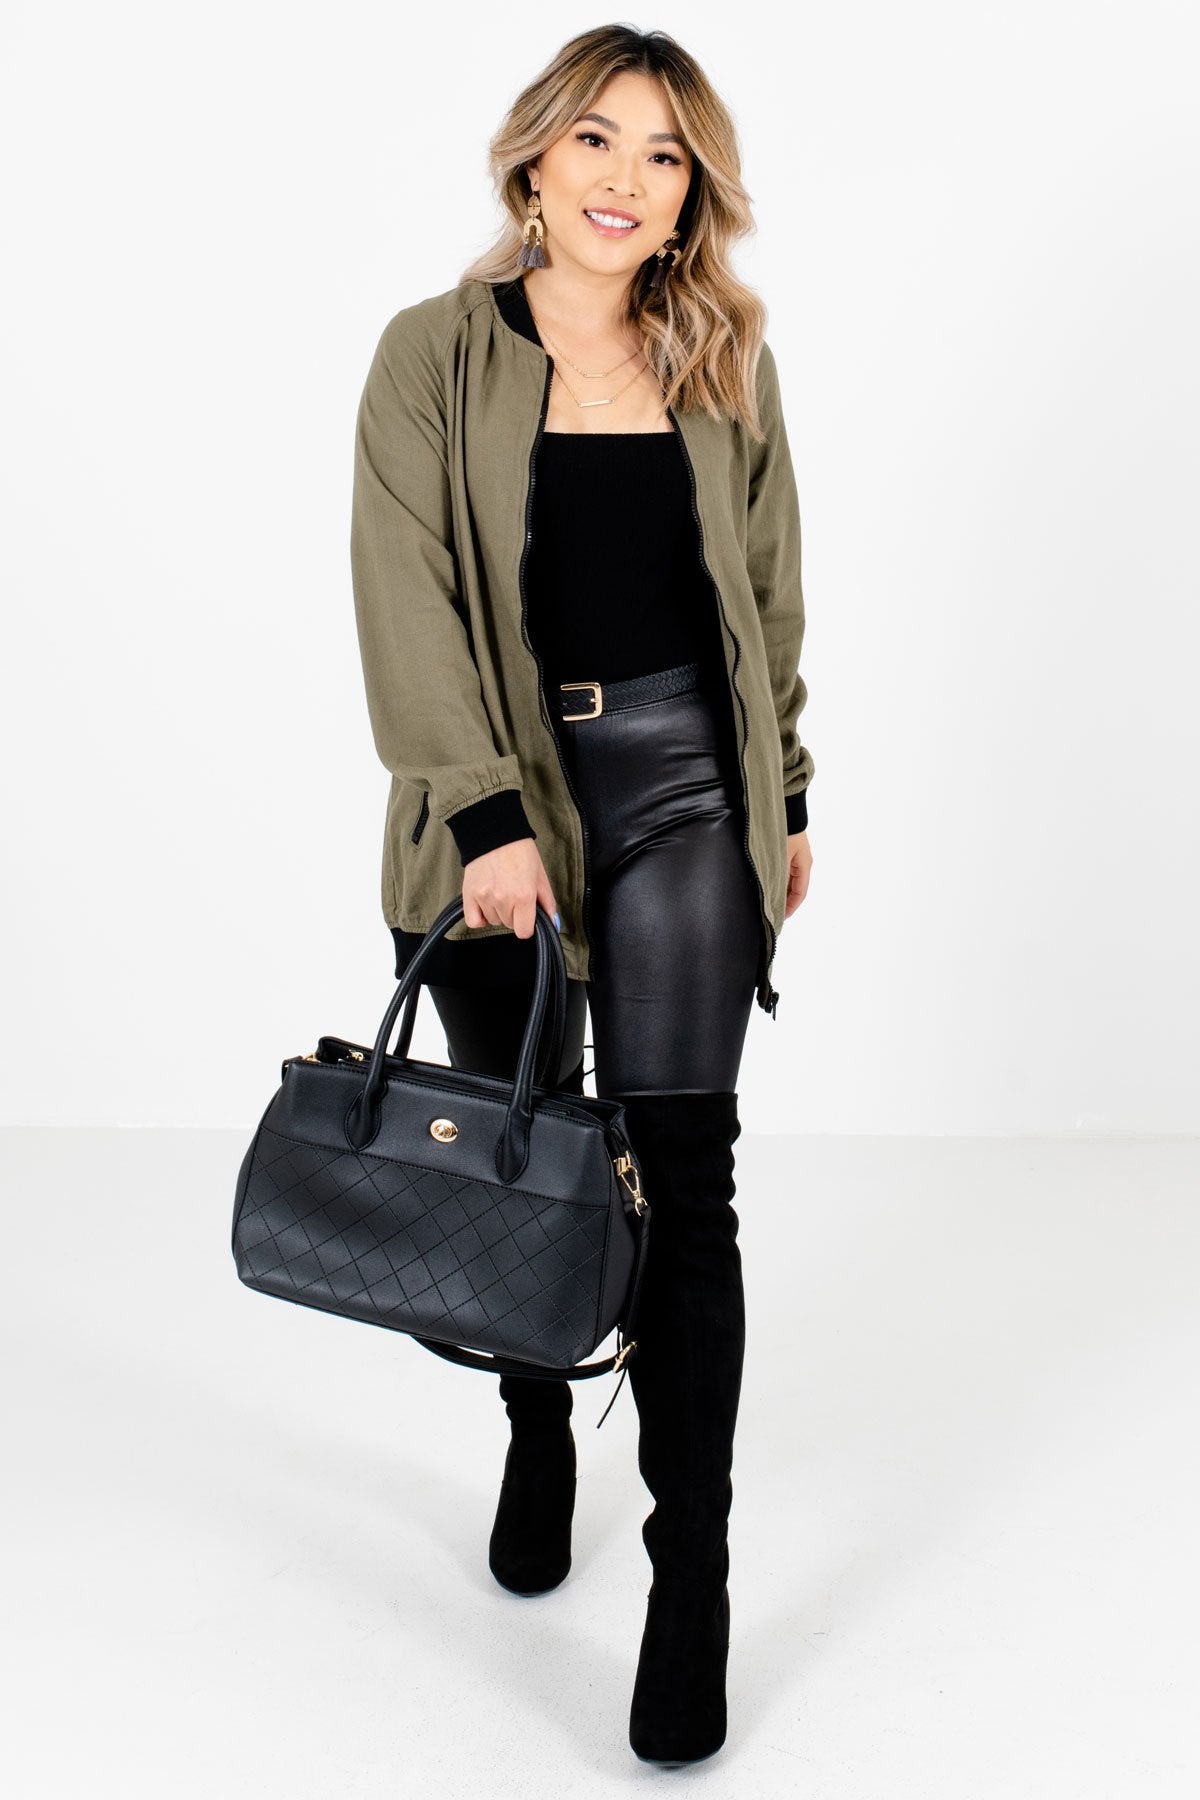 Women’s Olive Green Fall and Winter Boutique Clothing